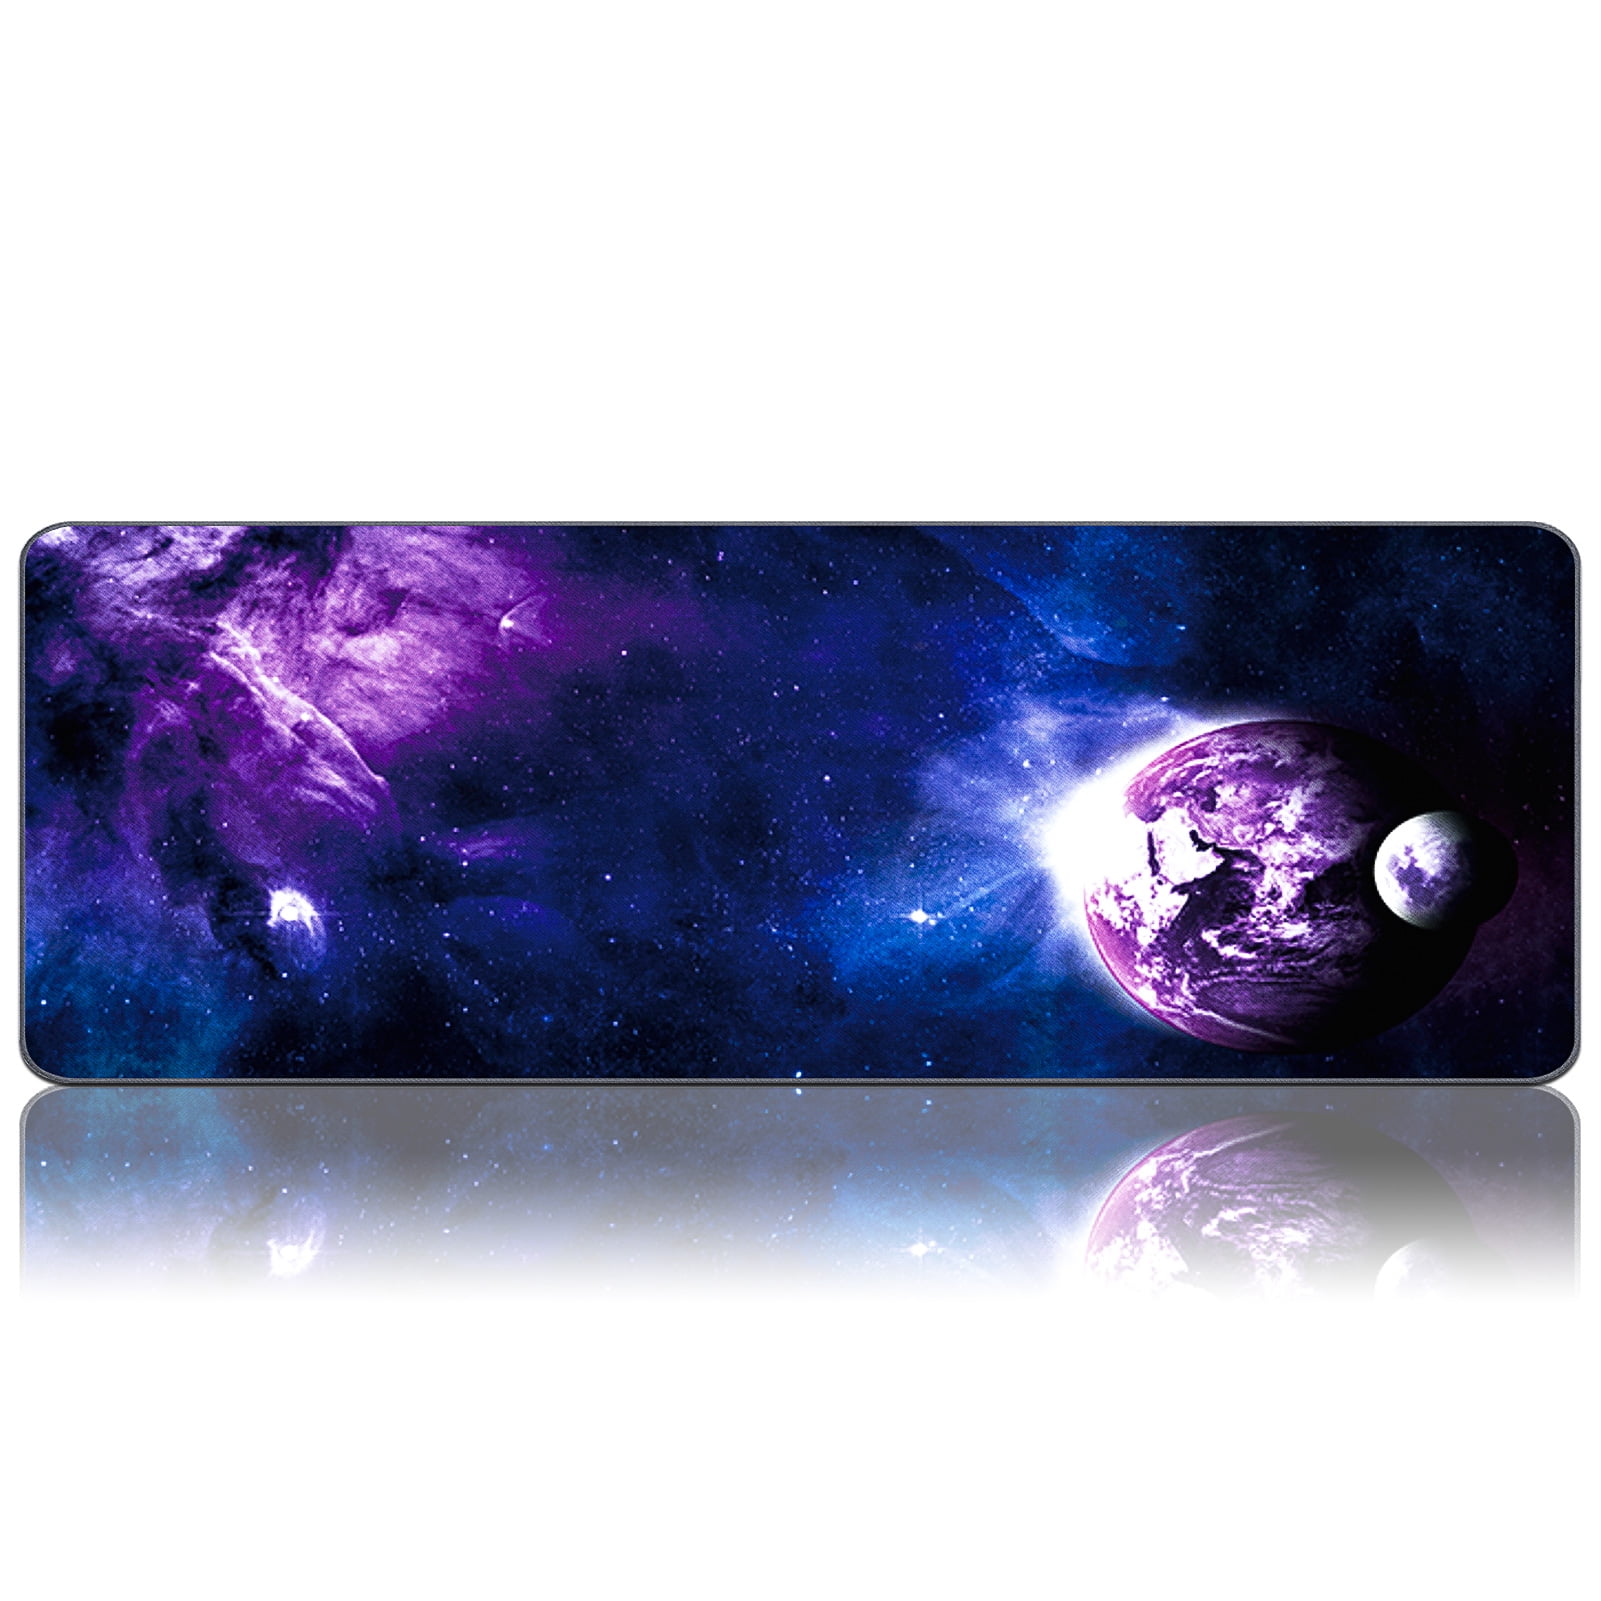 Majin Buu Wallpaper Mouse Pad Large, Stitched Edges Gaming Mousepad,  Anti-Slip Rubber Base Computer Keyboard Pad Mat, 10 X 12 Inch 7.9 X 9.5 in  : : Electronics